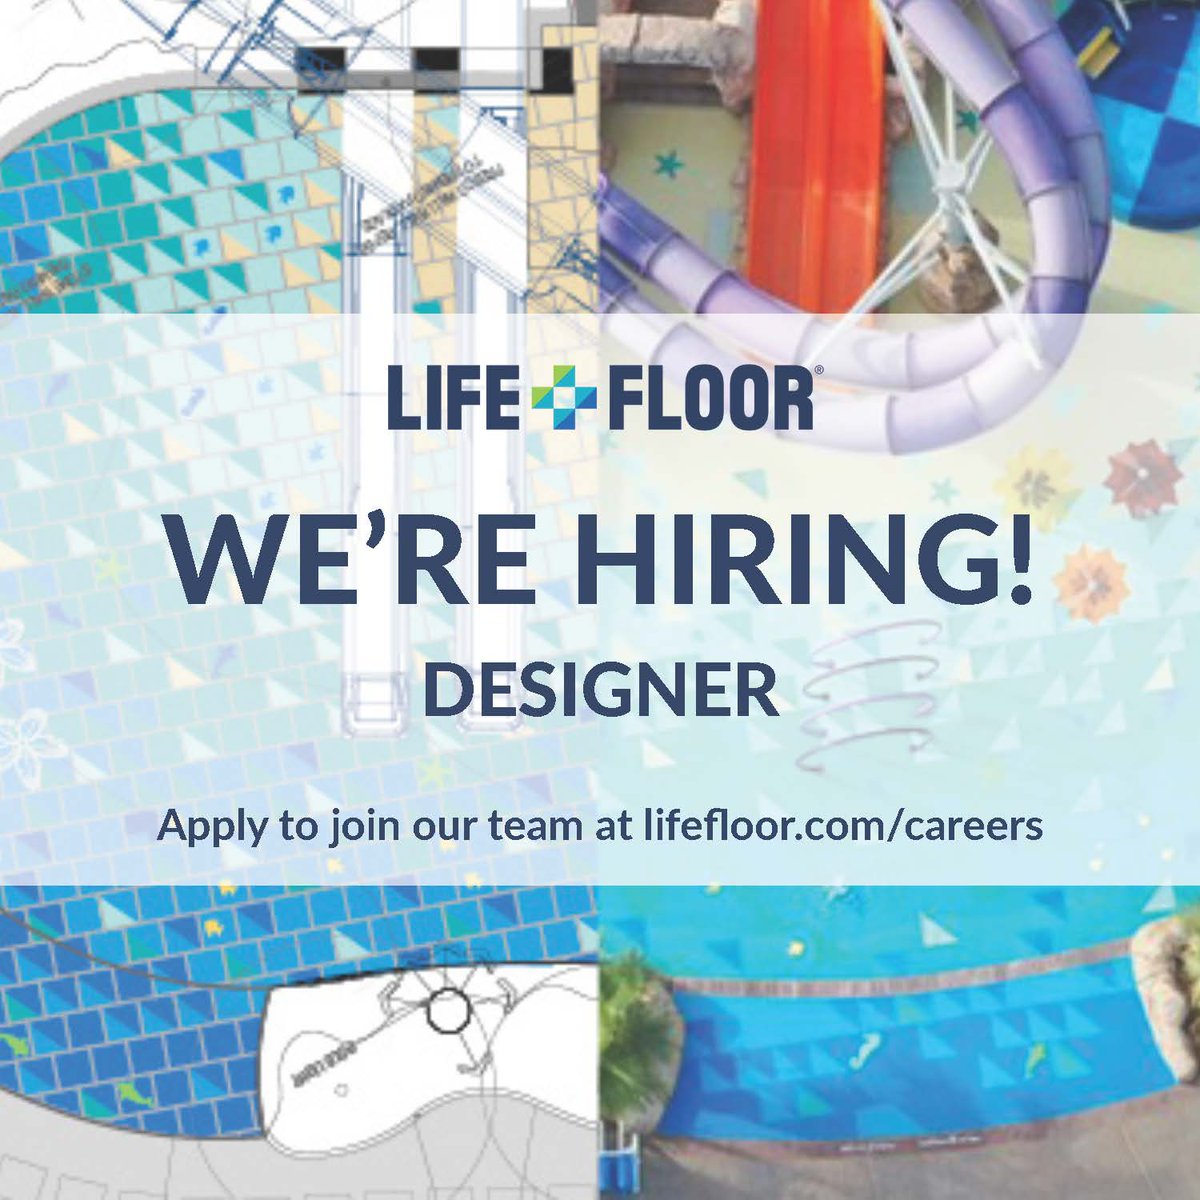 We're excited to announce that we're expanding our Design Team! Do you have a passion for graphic design & a background in architecture, aquatics, or themed entertainment? Learn more + apply: lifefloor.com/careers #hiringalerts #hiringopportunity #aquatics #careers